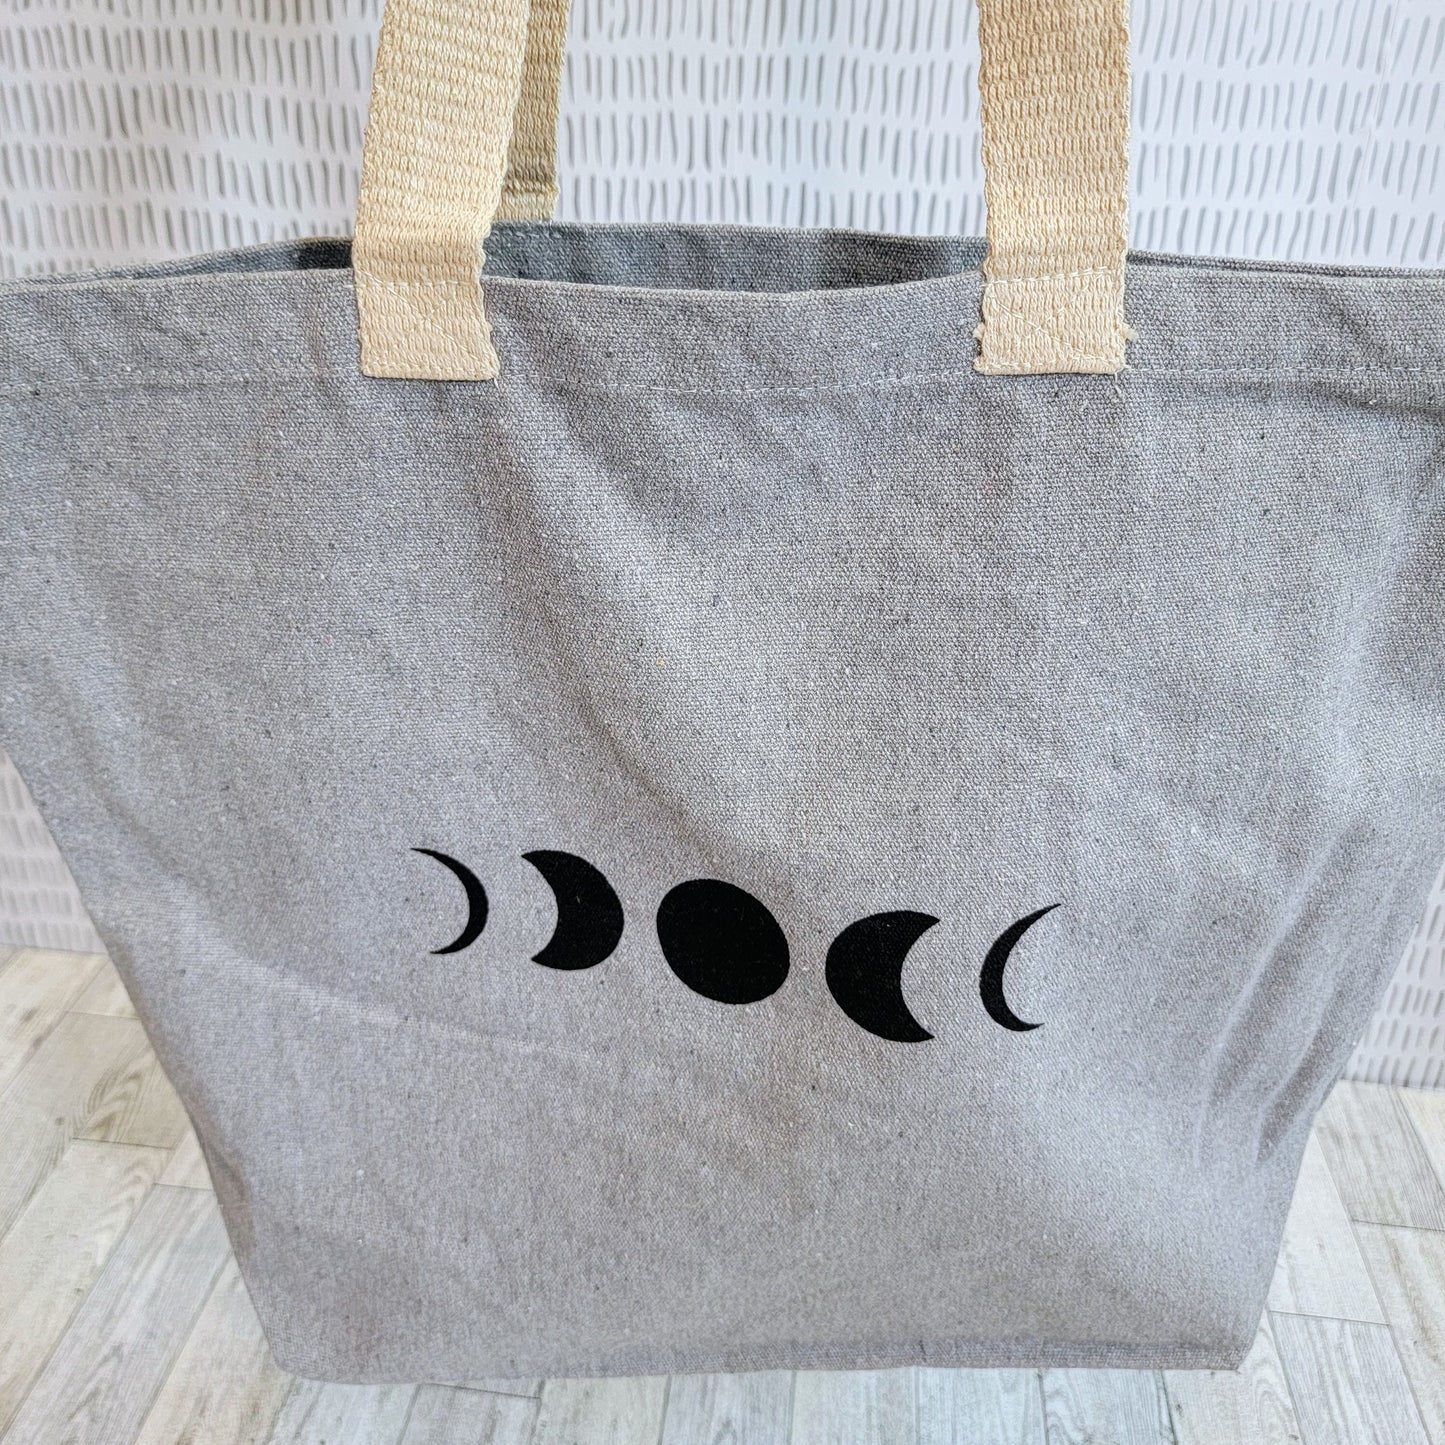 Moon Phases Recycled Canvas Tote Bag - Light Grey with Black Ink - Open Bag Shot